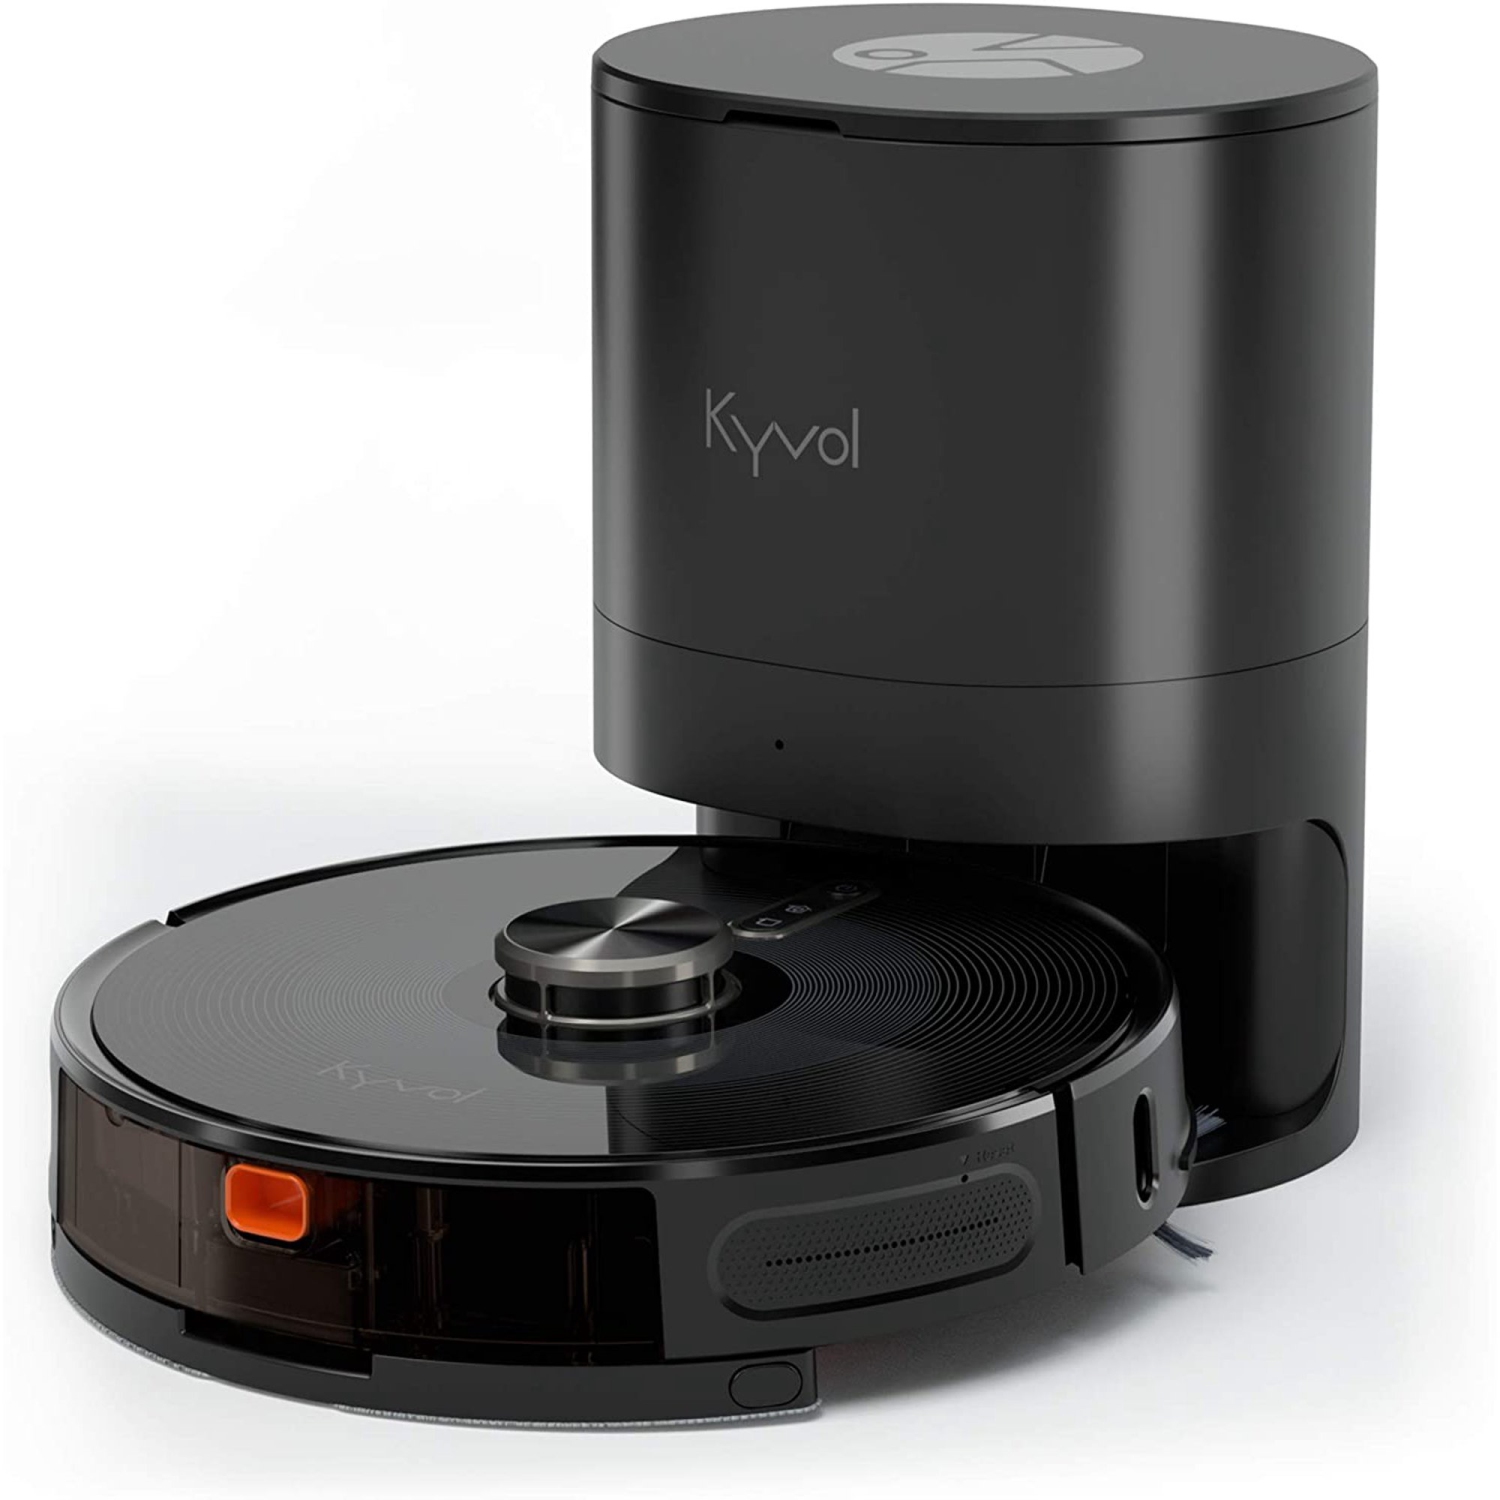 Kyvol Cybovac S31 Robot Vacuum and Mop, Automatic Dirt Disposal, Lidar Navigation, Voice Control, 240 mins Runtime, Works with Alexa.